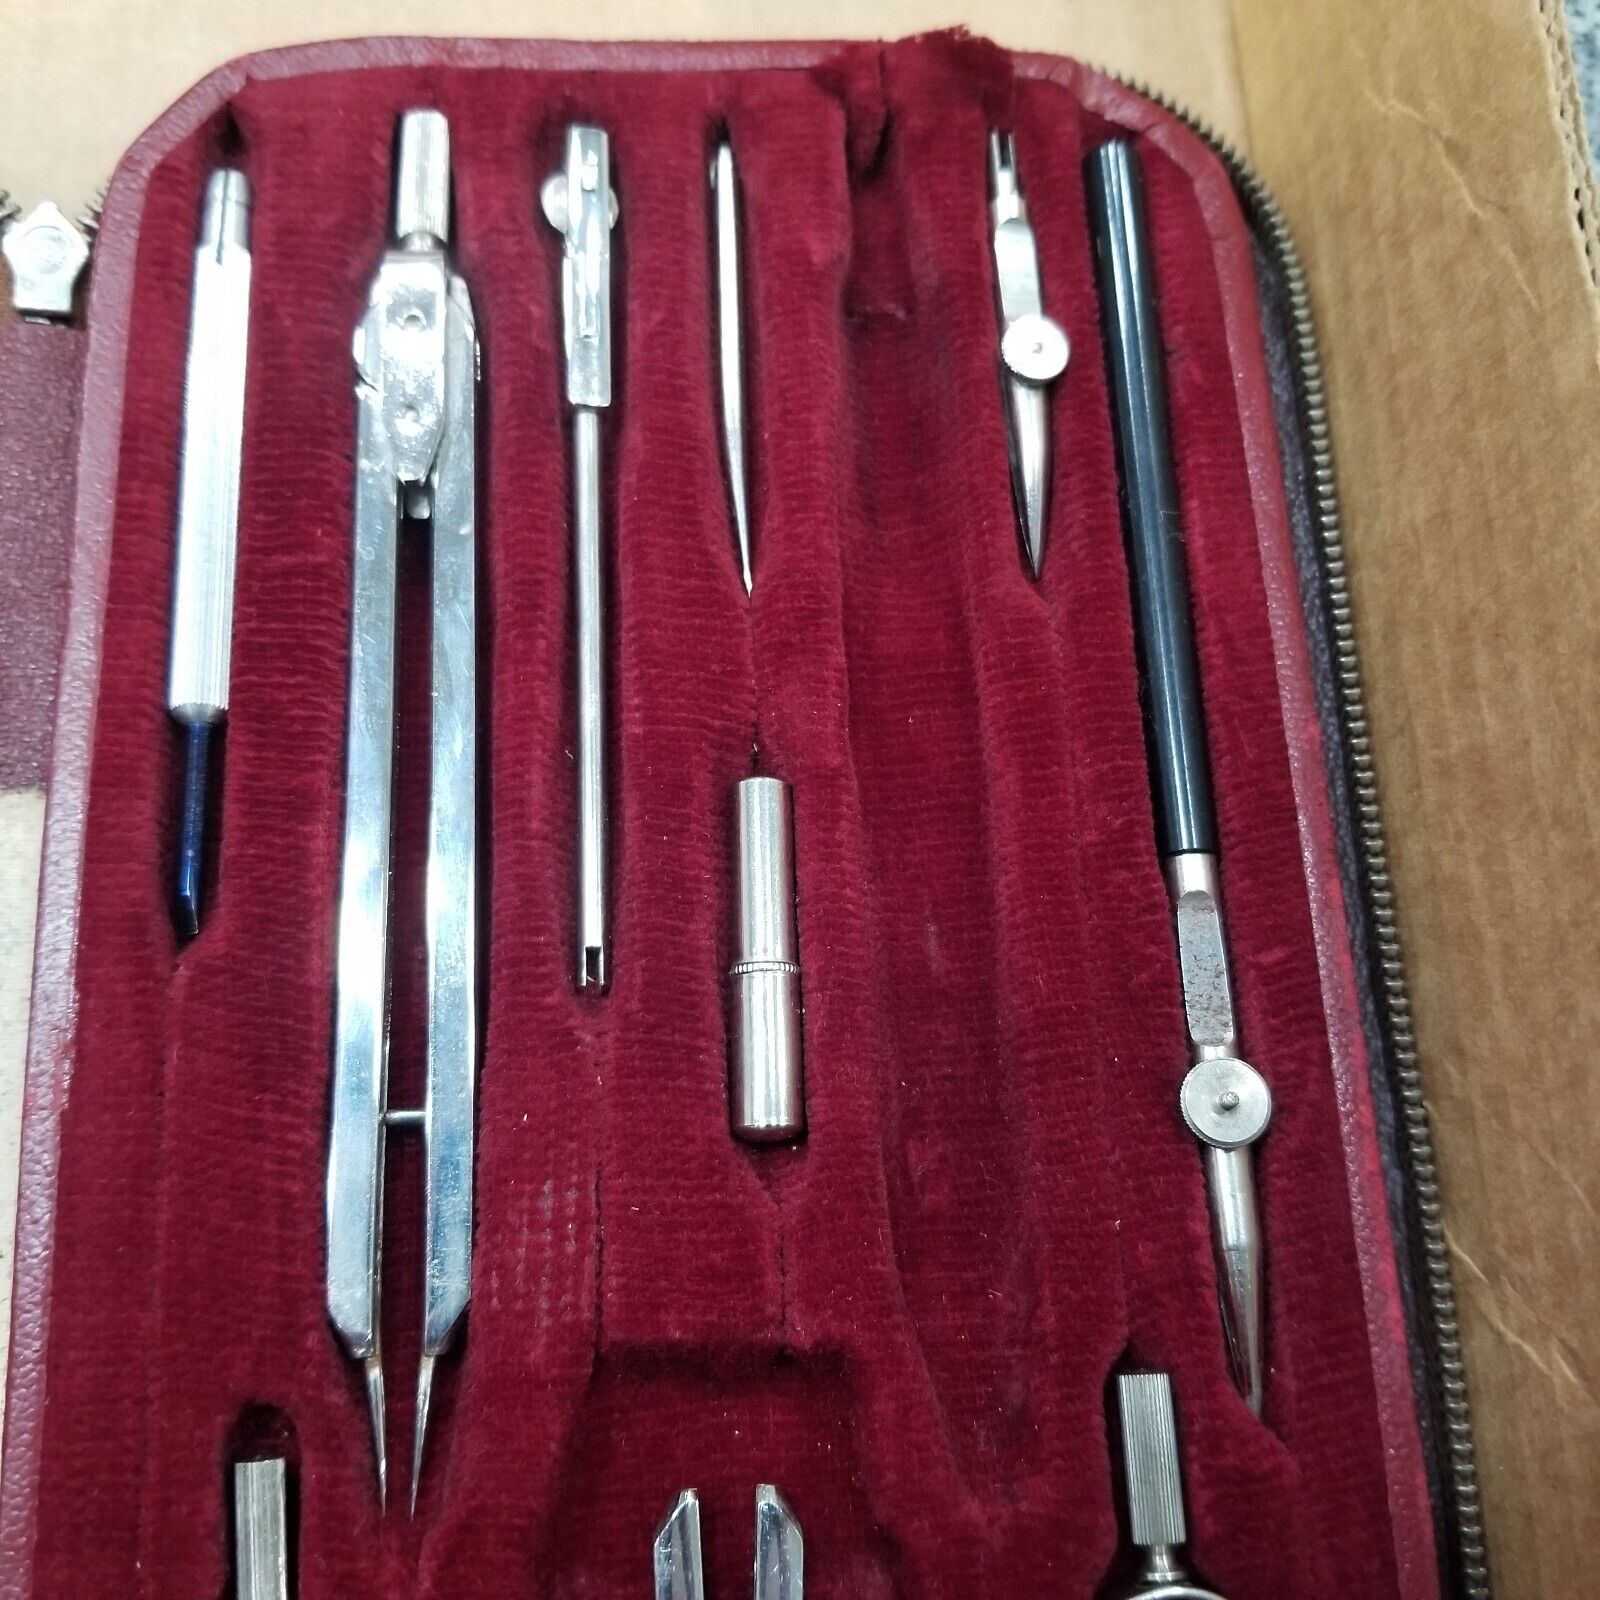 Vintage Fullerton Made in West Germany set #315 Drafting or Compass tools-read